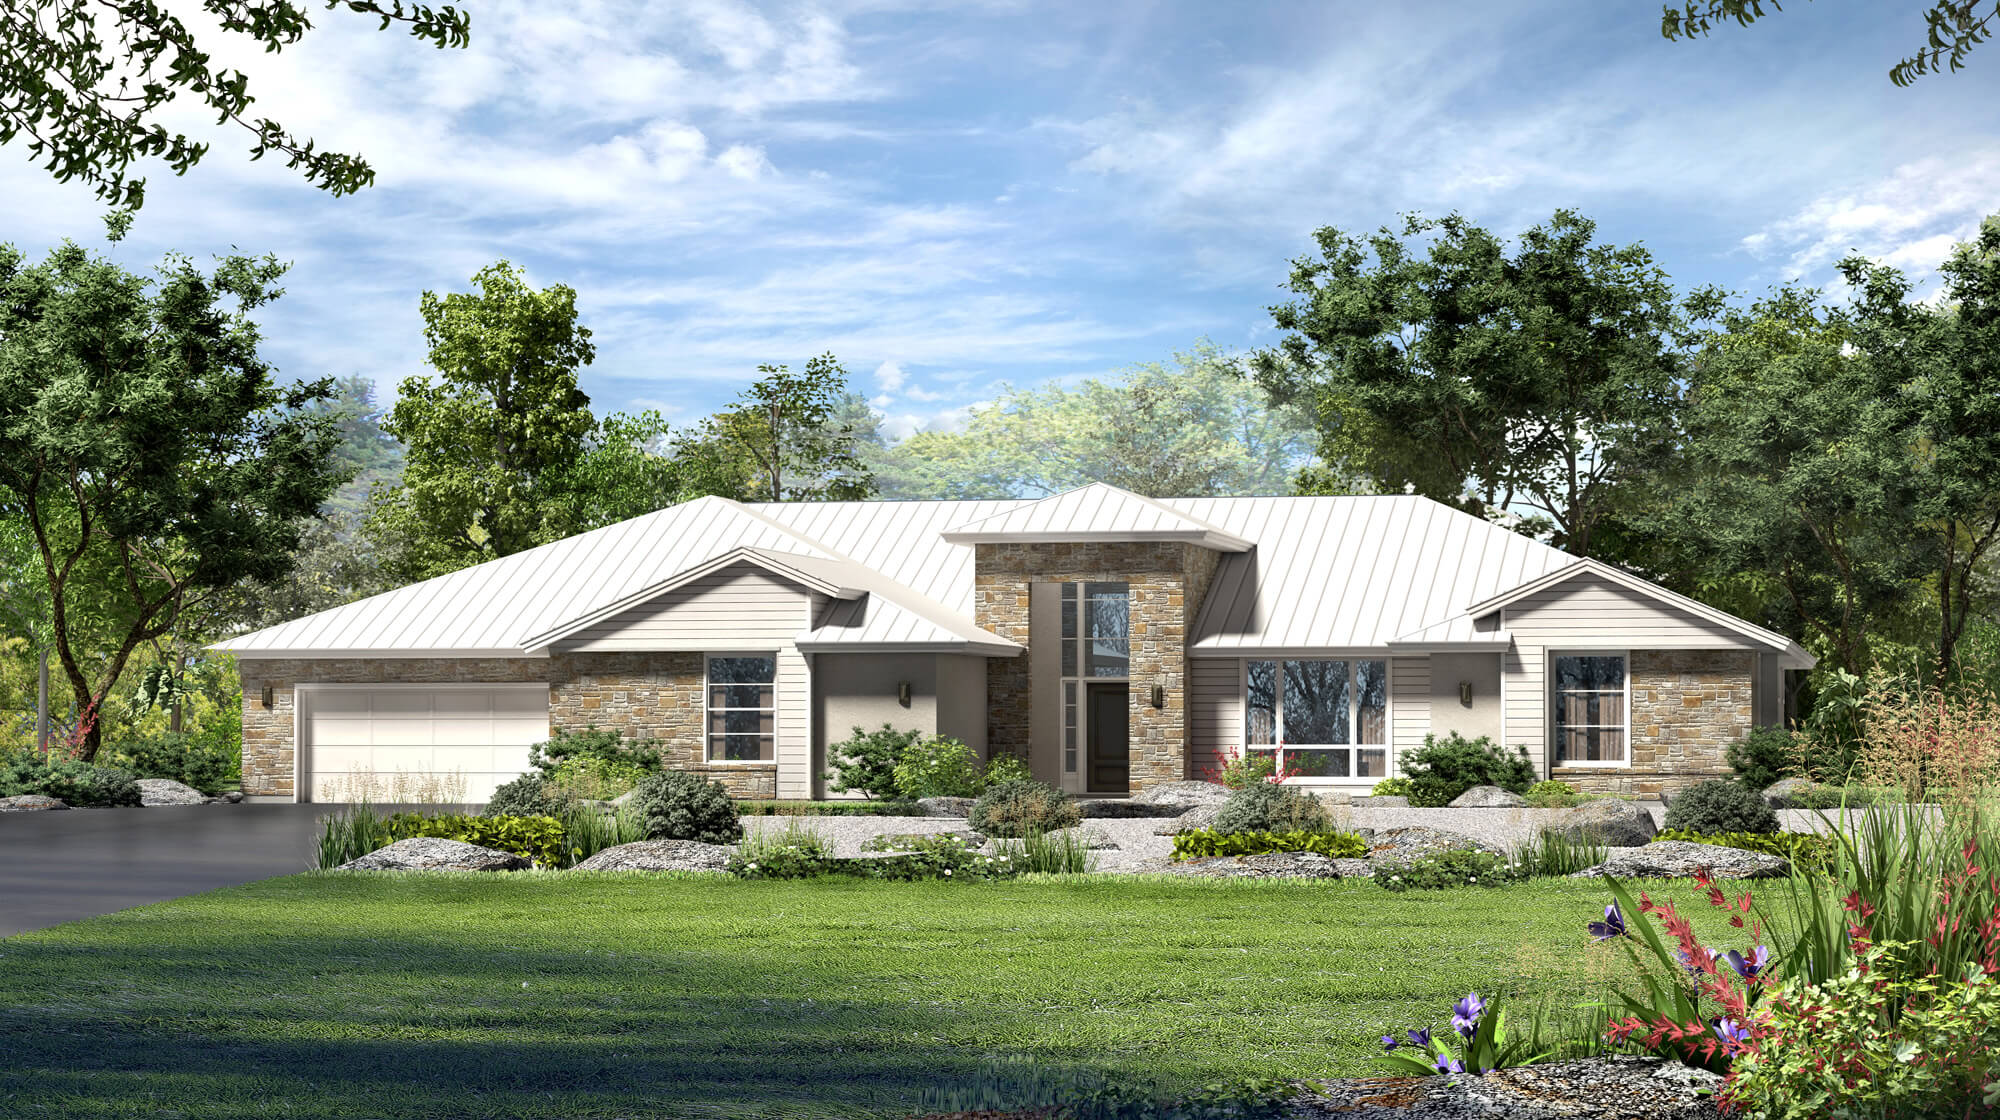 Exterior Rendering - Single Family House - Kissing Tree Bungalow 3D House Rendering | Aareas Interactive